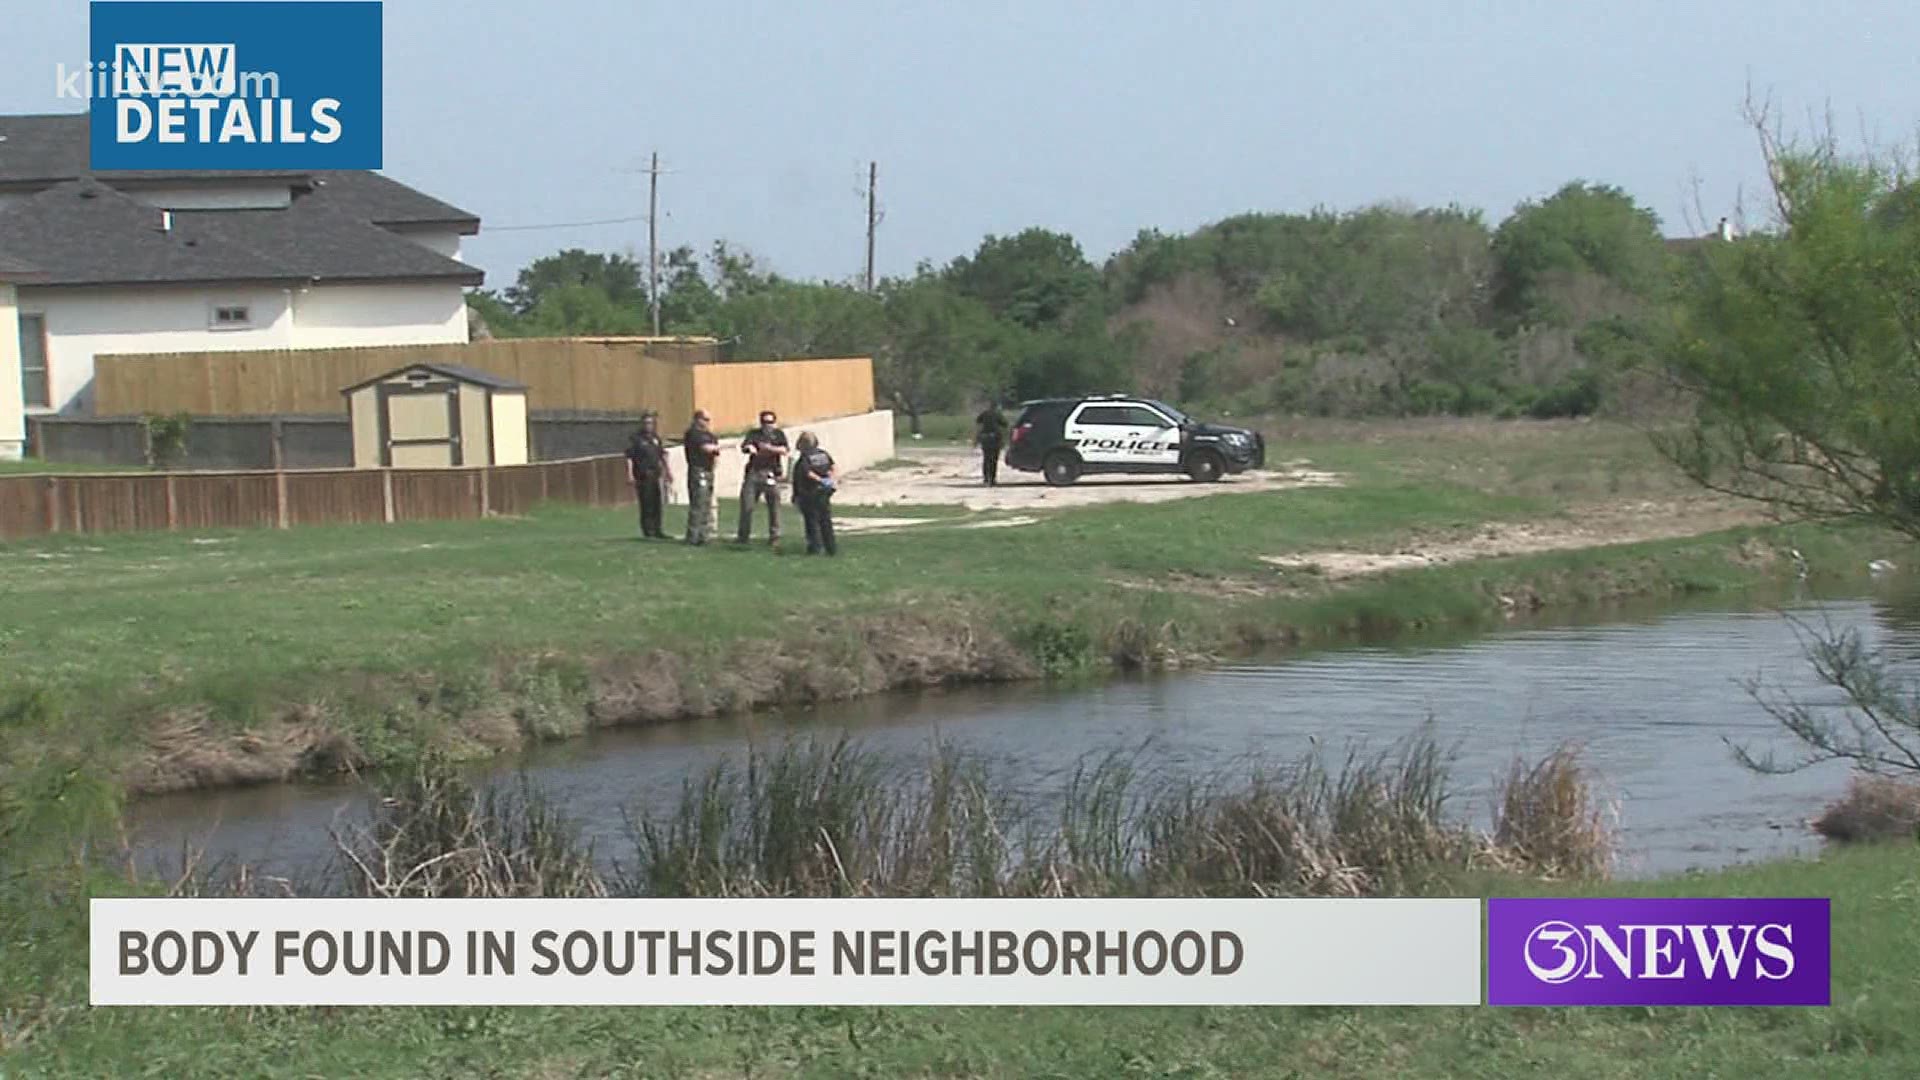 Corpus Christi Police Officers were called to the 7200 block of Lake Placid Drive after someone called police to report a discovered body.